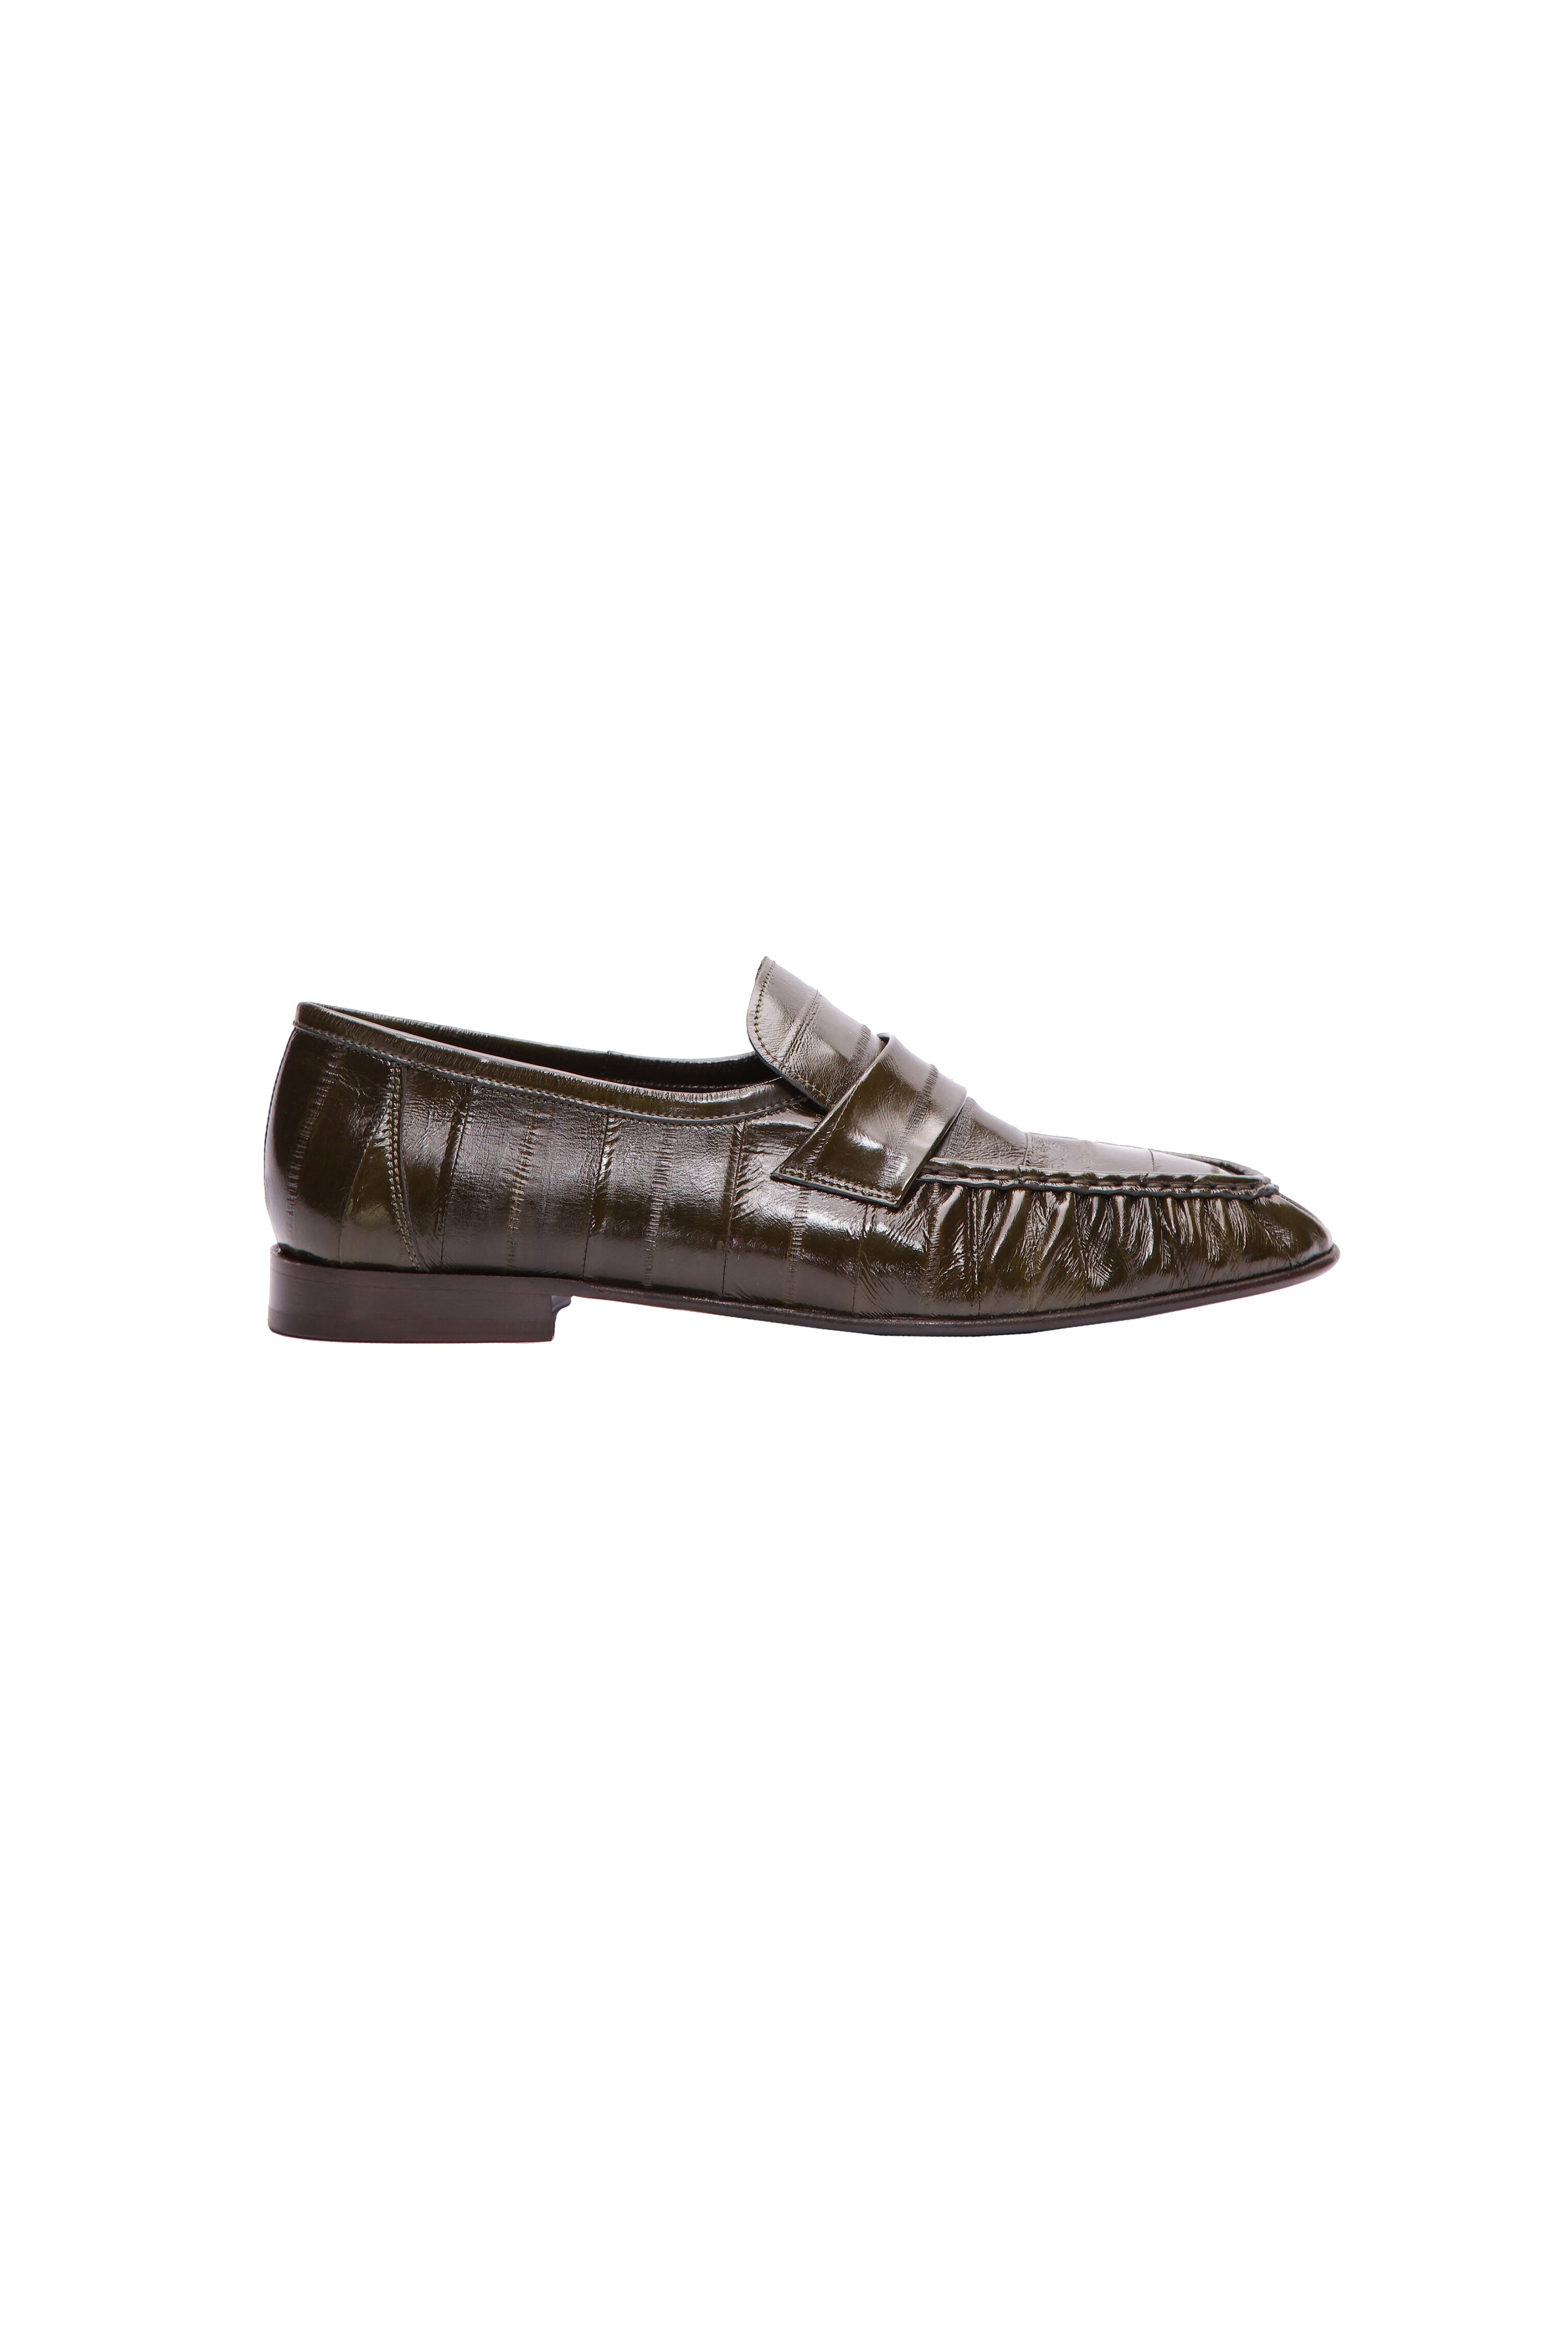 THE ROW Olive Soft Leather Loafers